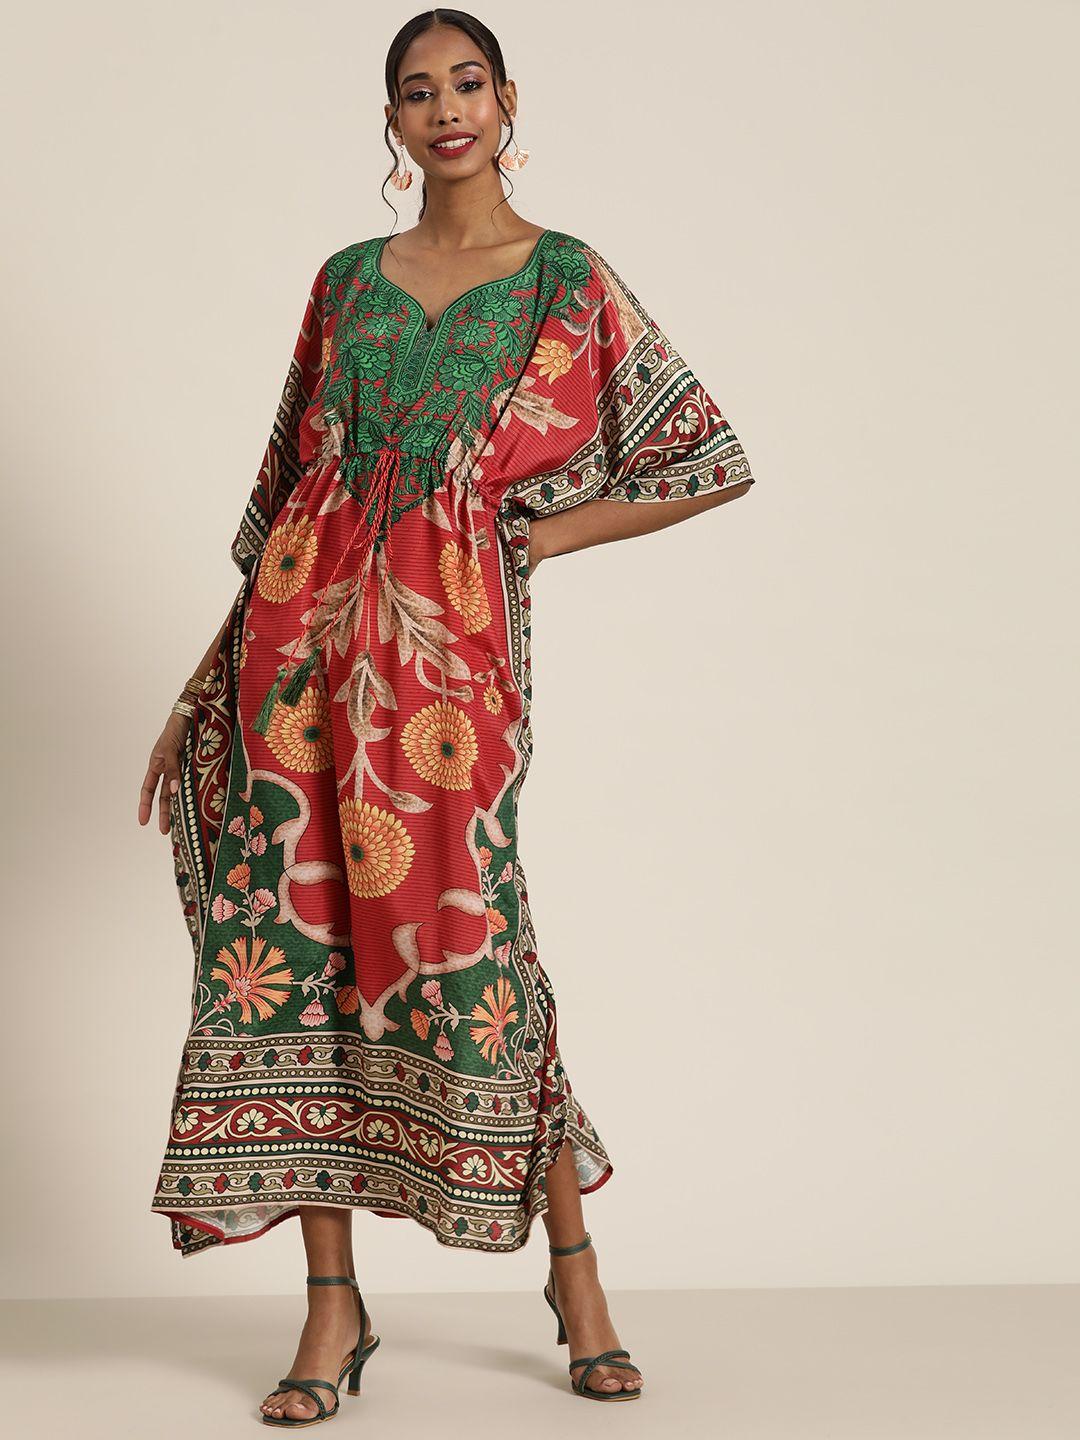 shae by sassafras red & green floral ethnic maxi midi dress